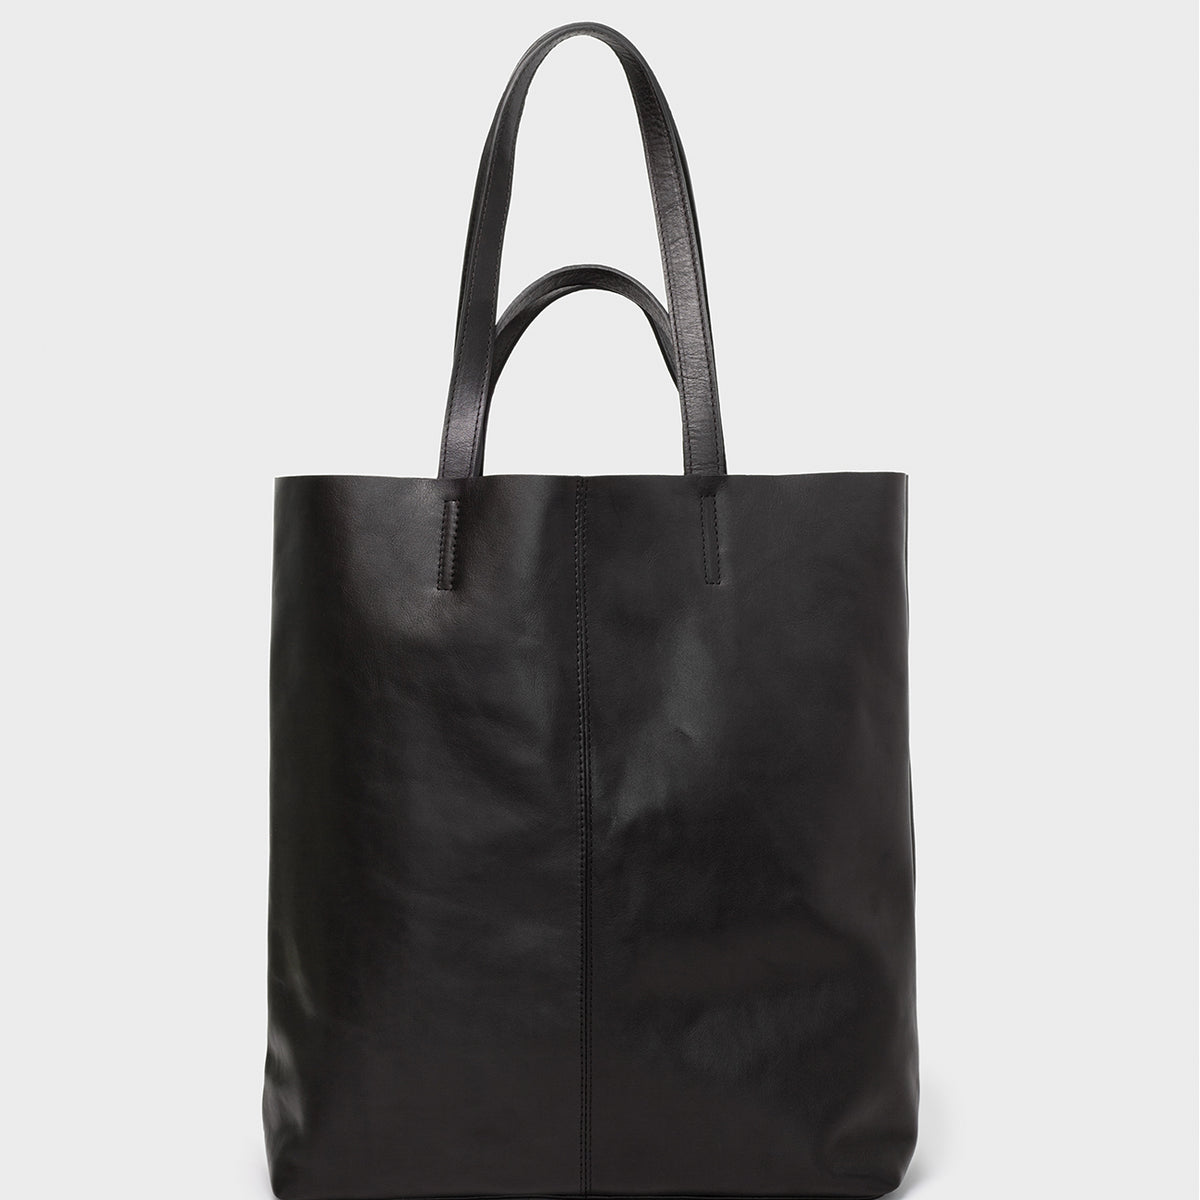 Leather Tote Bags in various colours and shapes – Tagged 